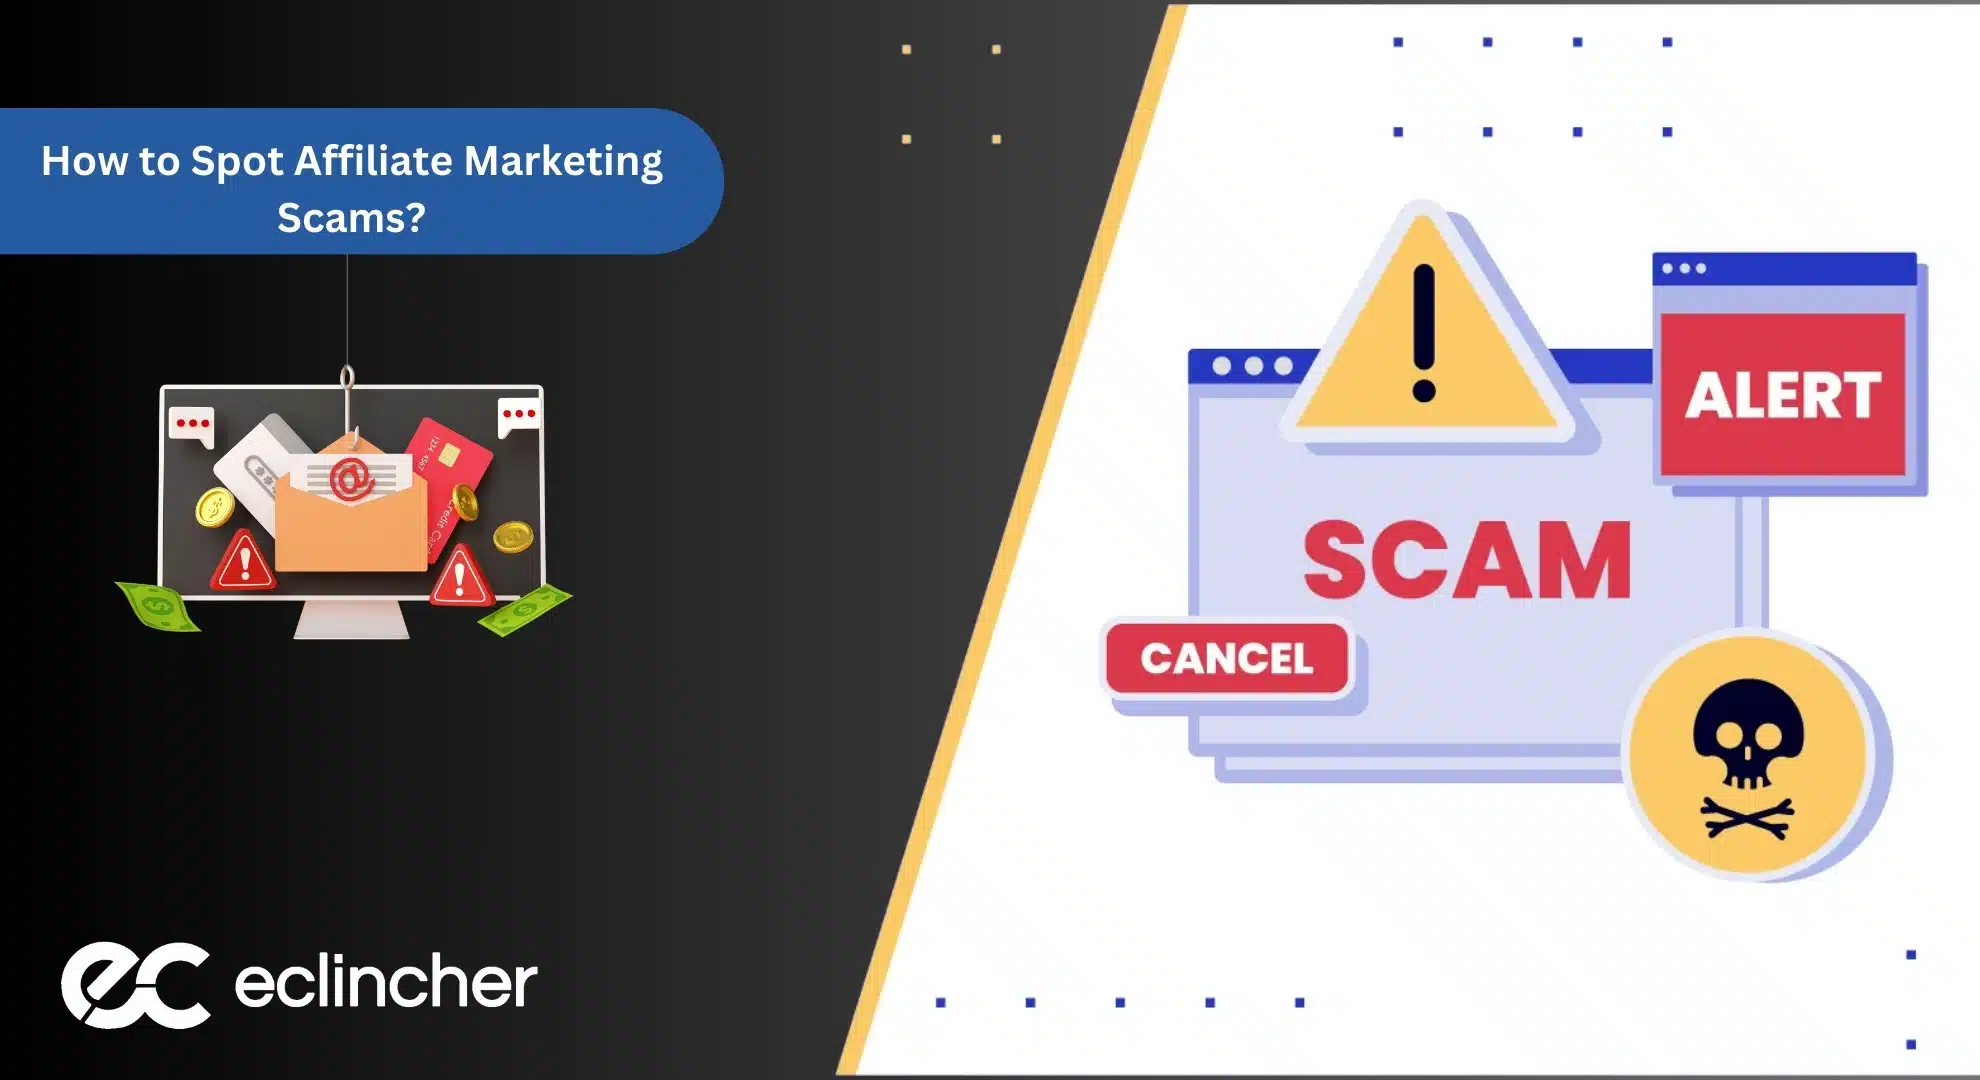 How to Spot Affiliate Marketing Scams